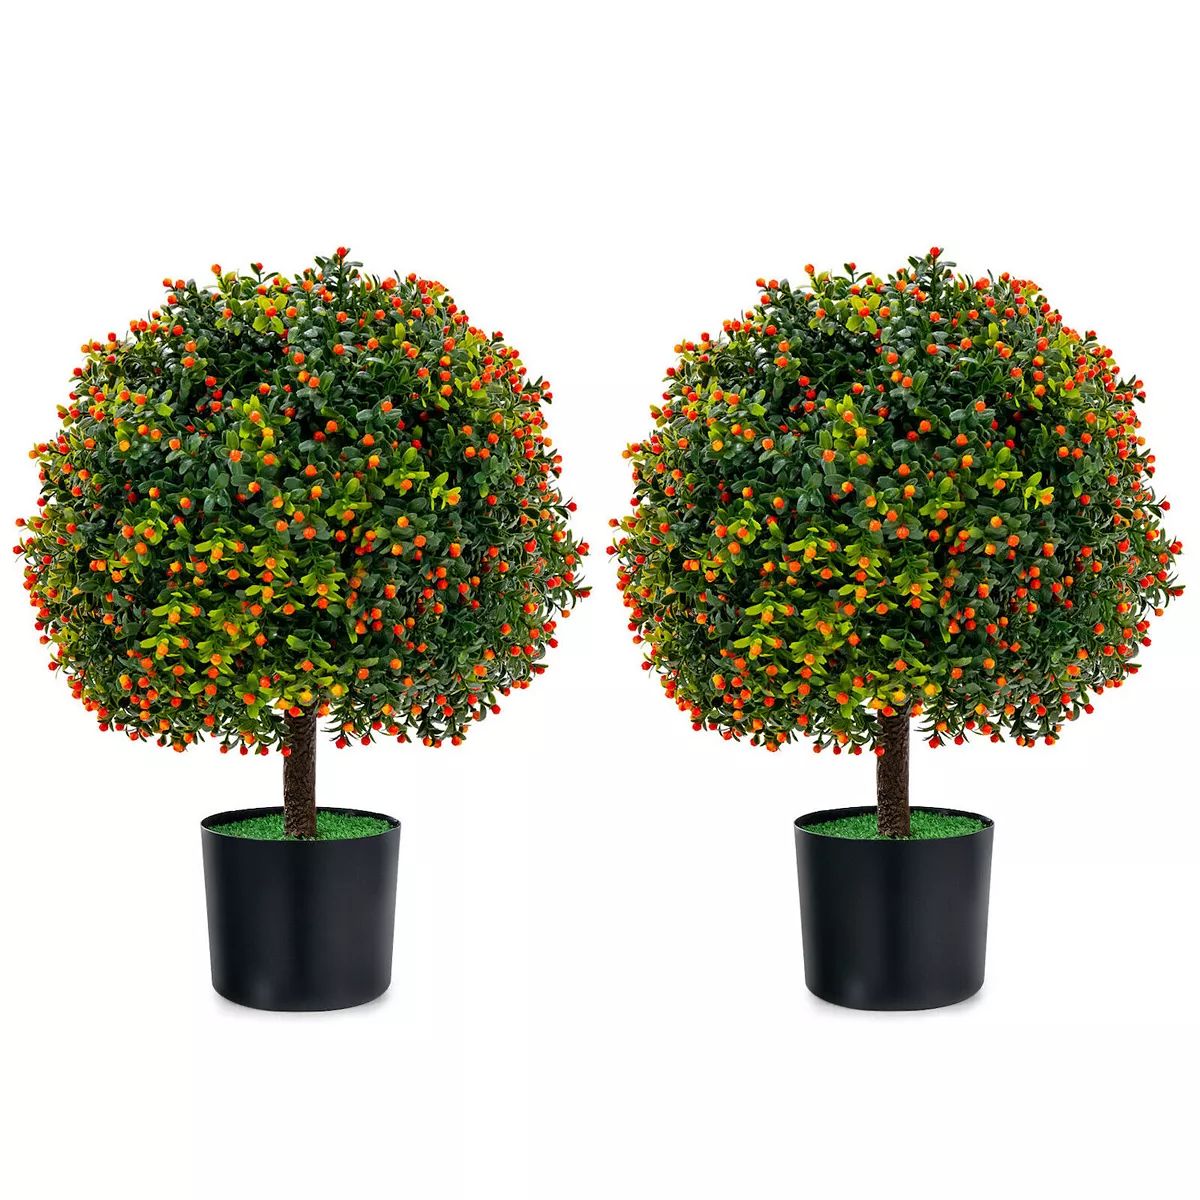 2-Pack Artificial Boxwood Topiary Ball Tree with Orange Fruit | Kohl's